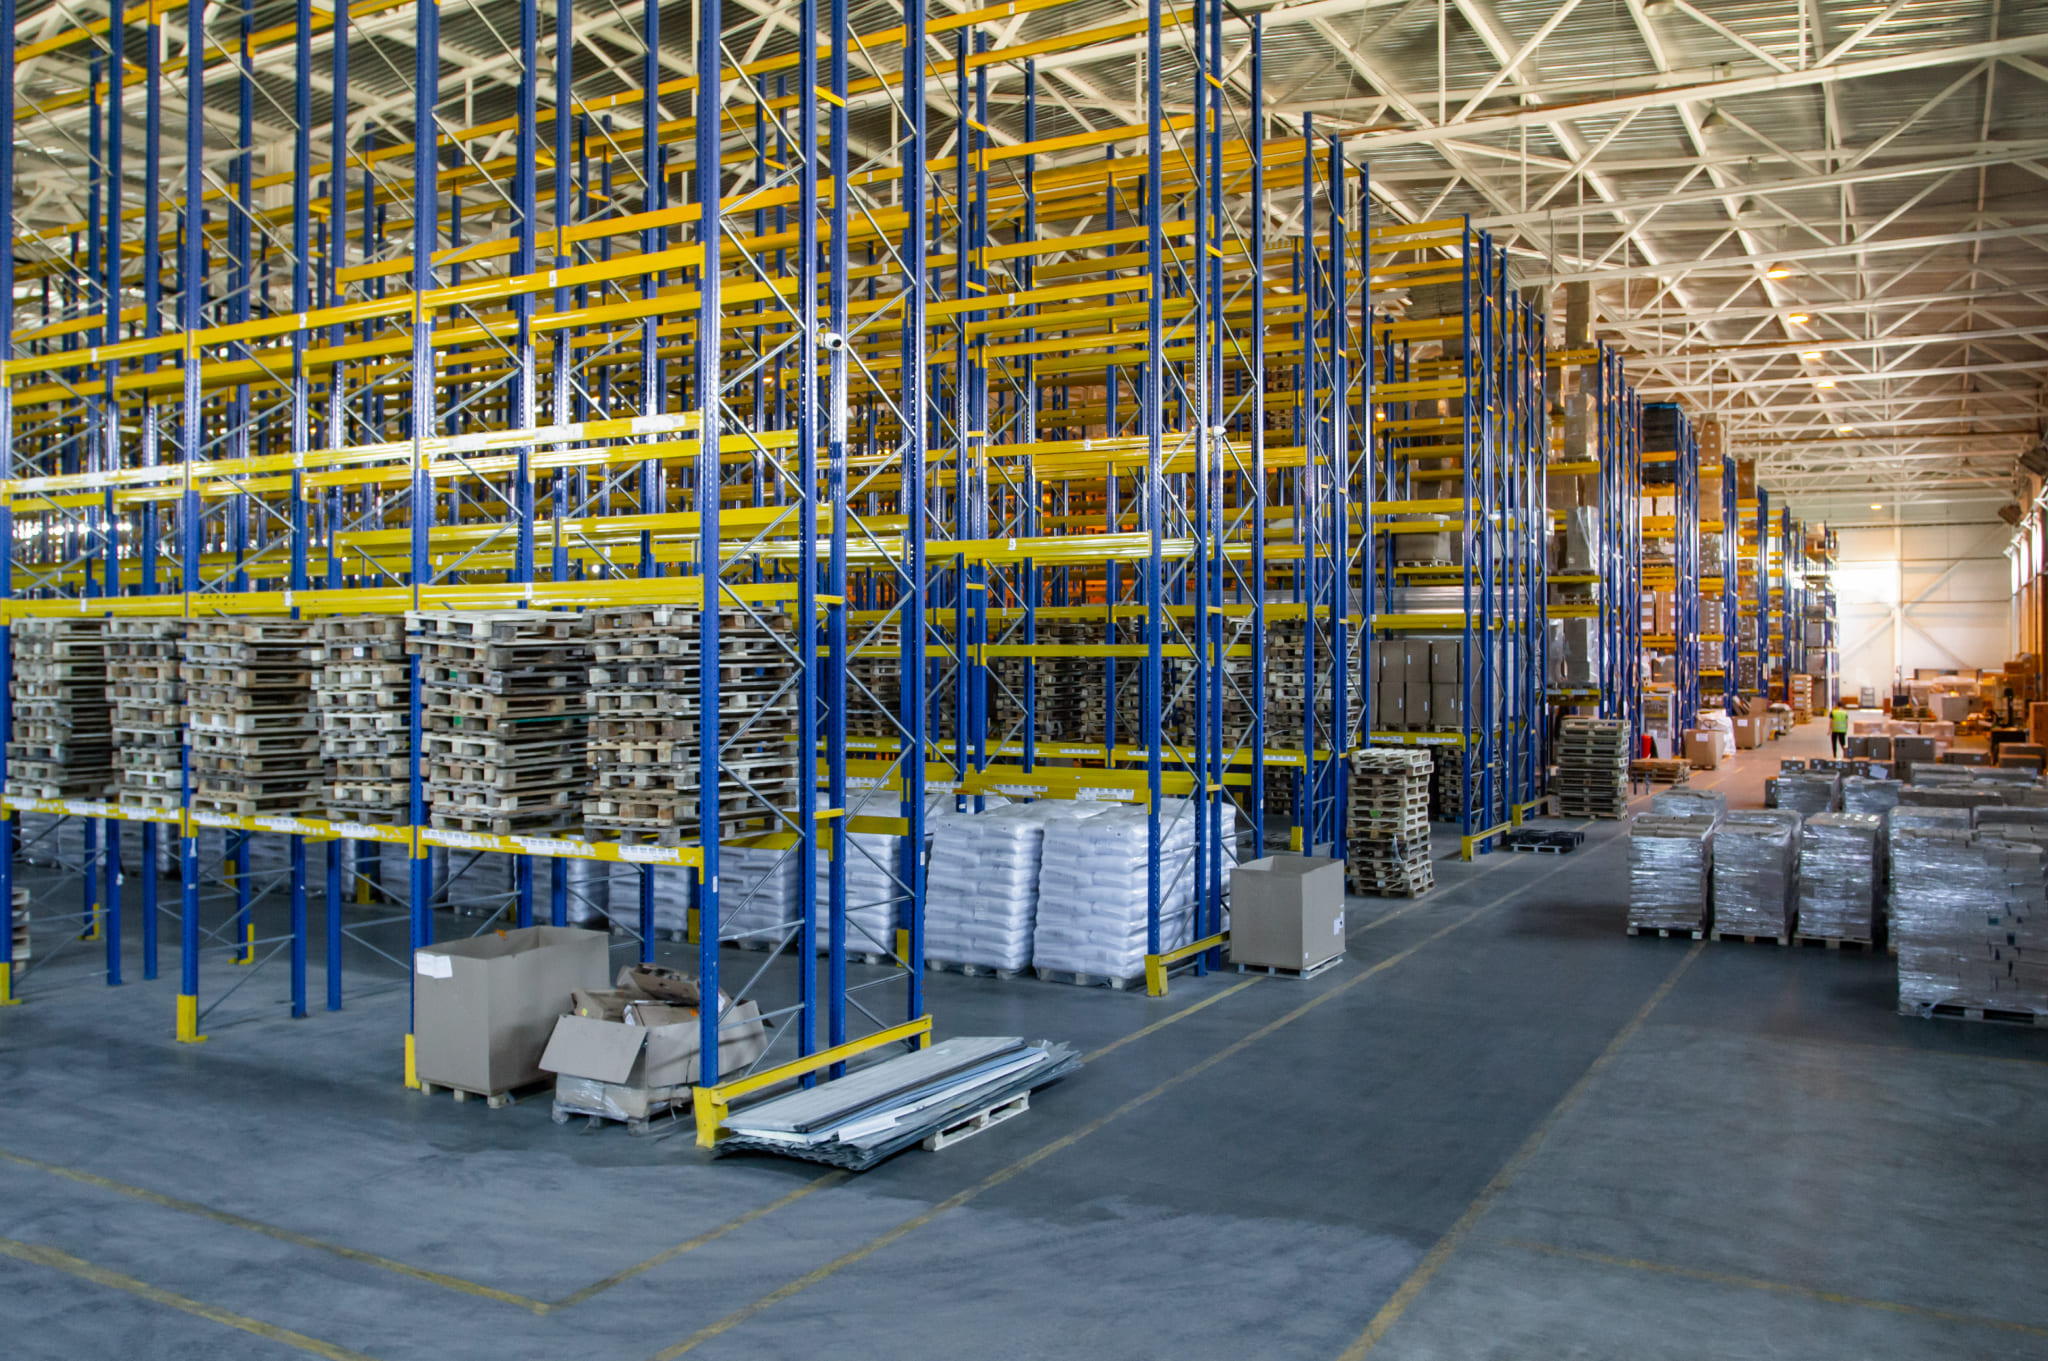 Assembly and disassembly of industrial mezzanine shelving